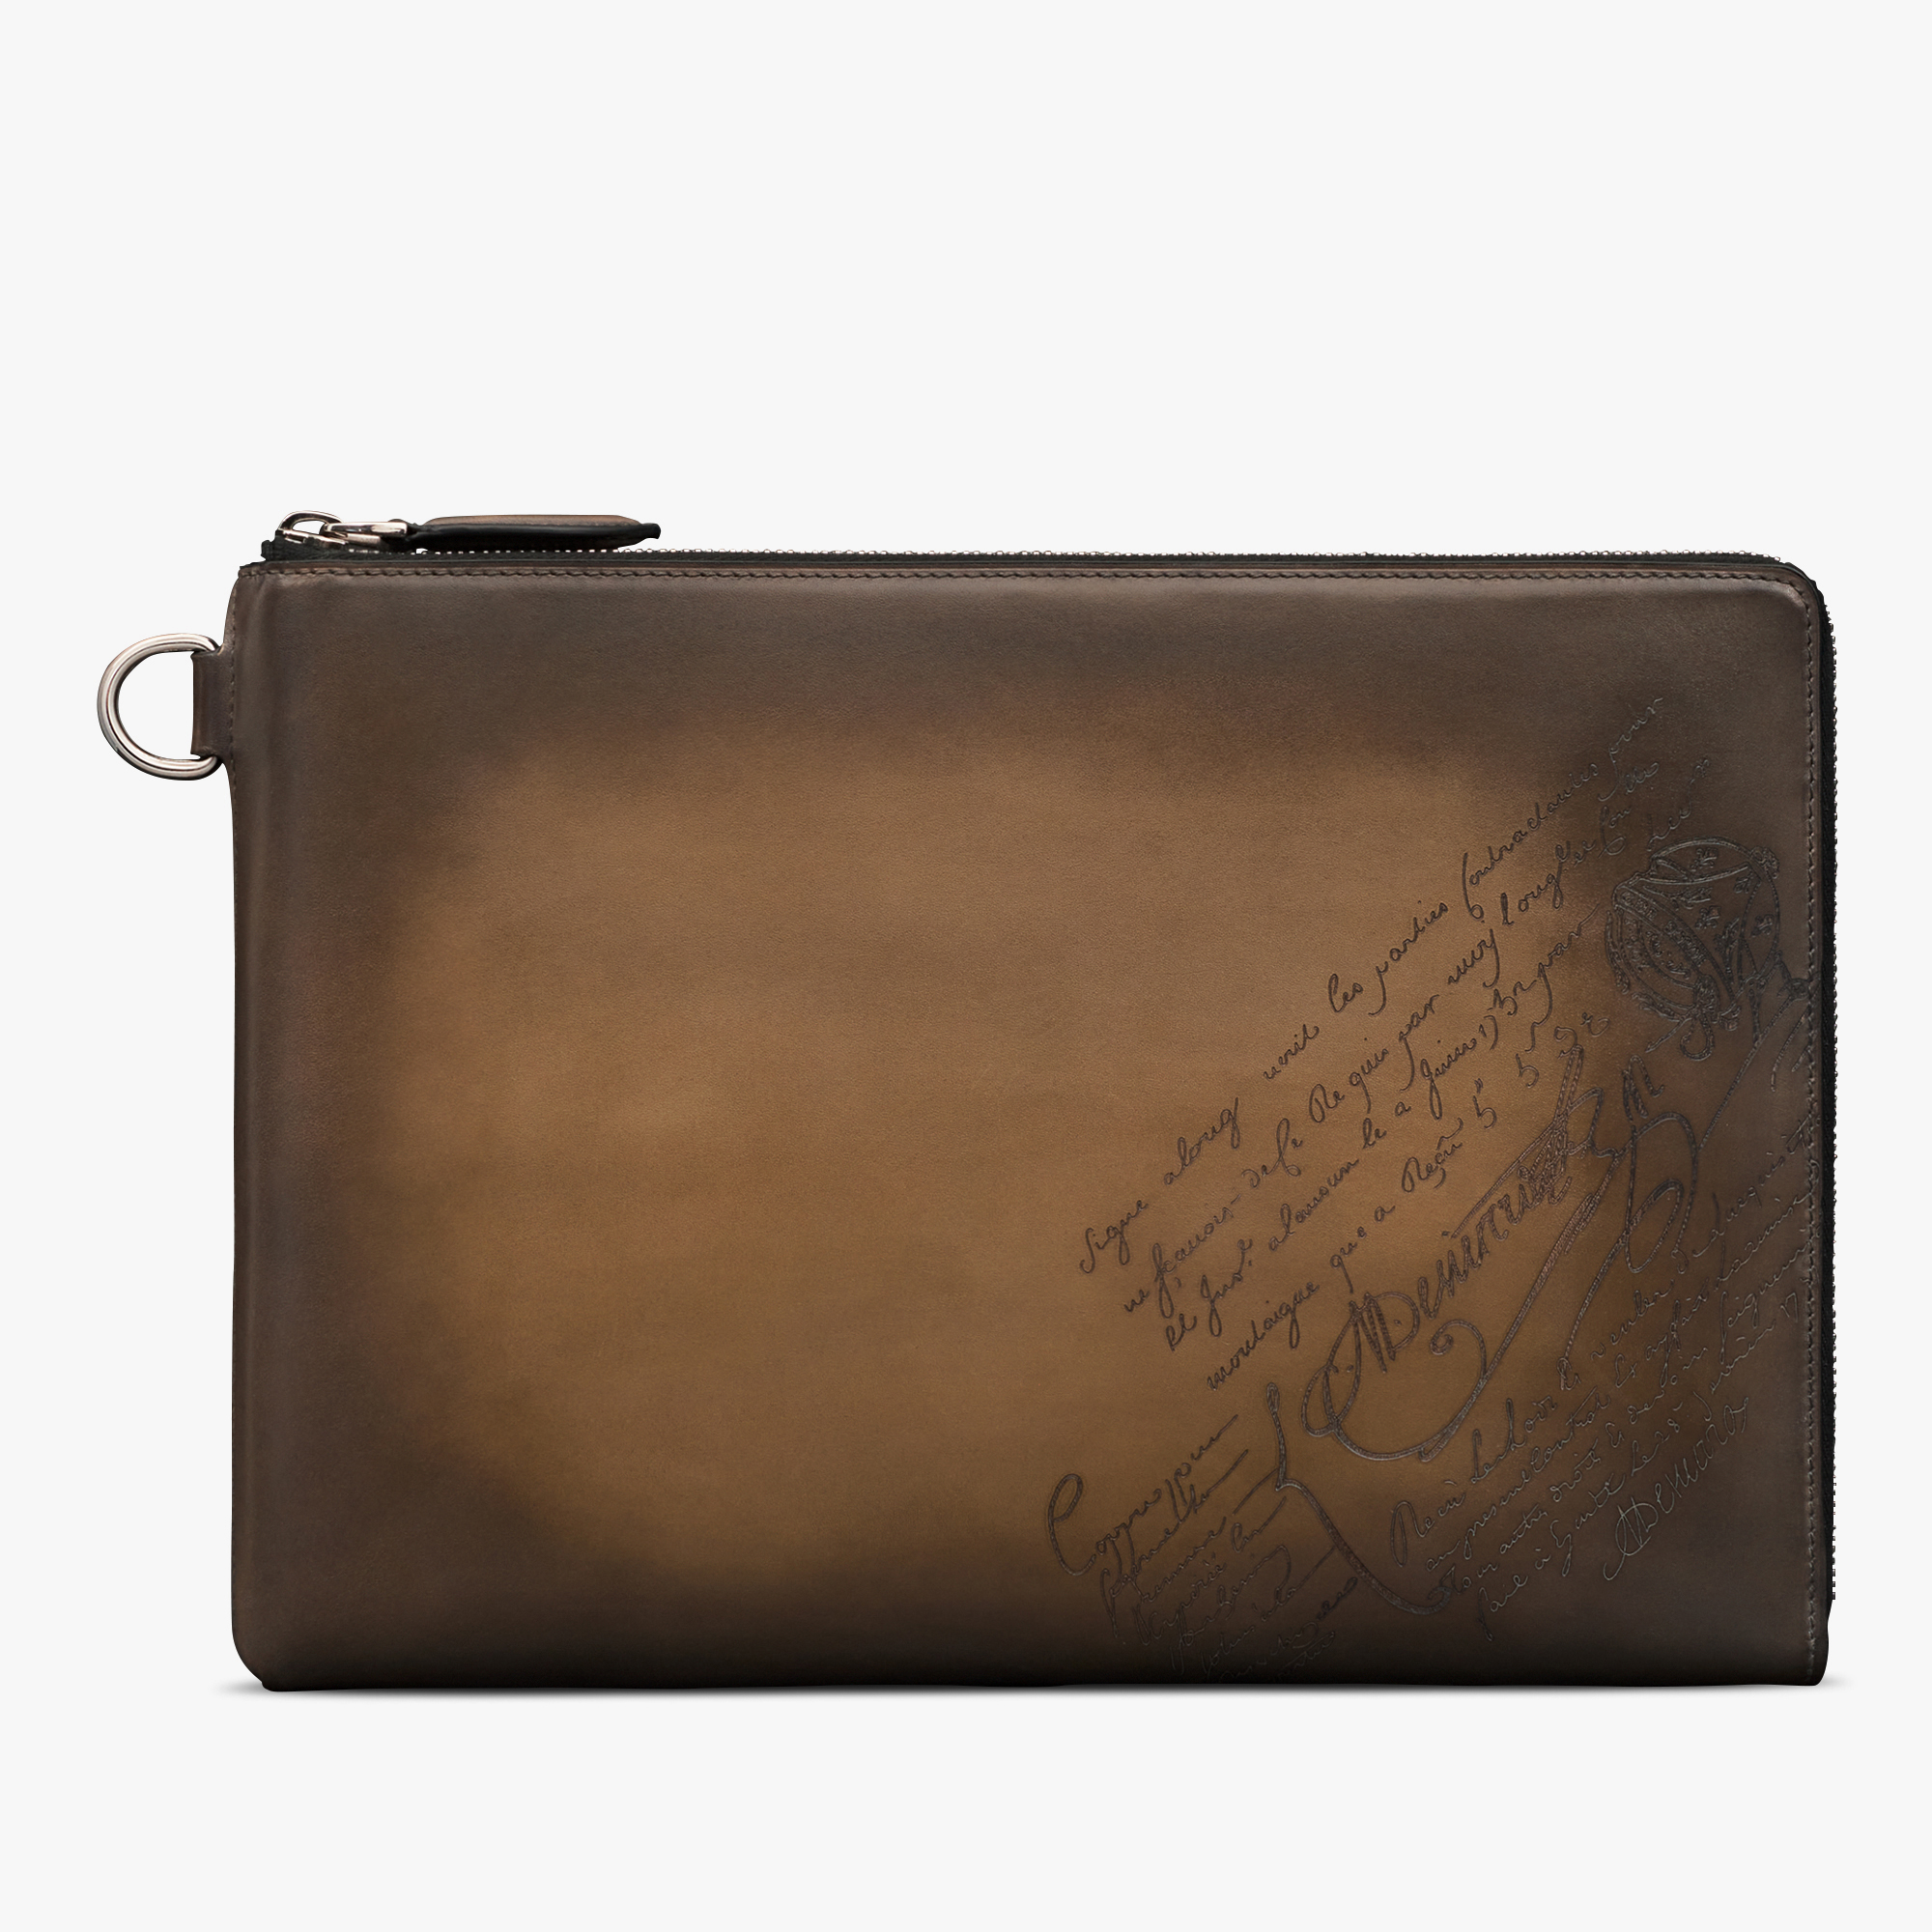 Nino GM Scritto Leather Clutch, OLIVE, hi-res